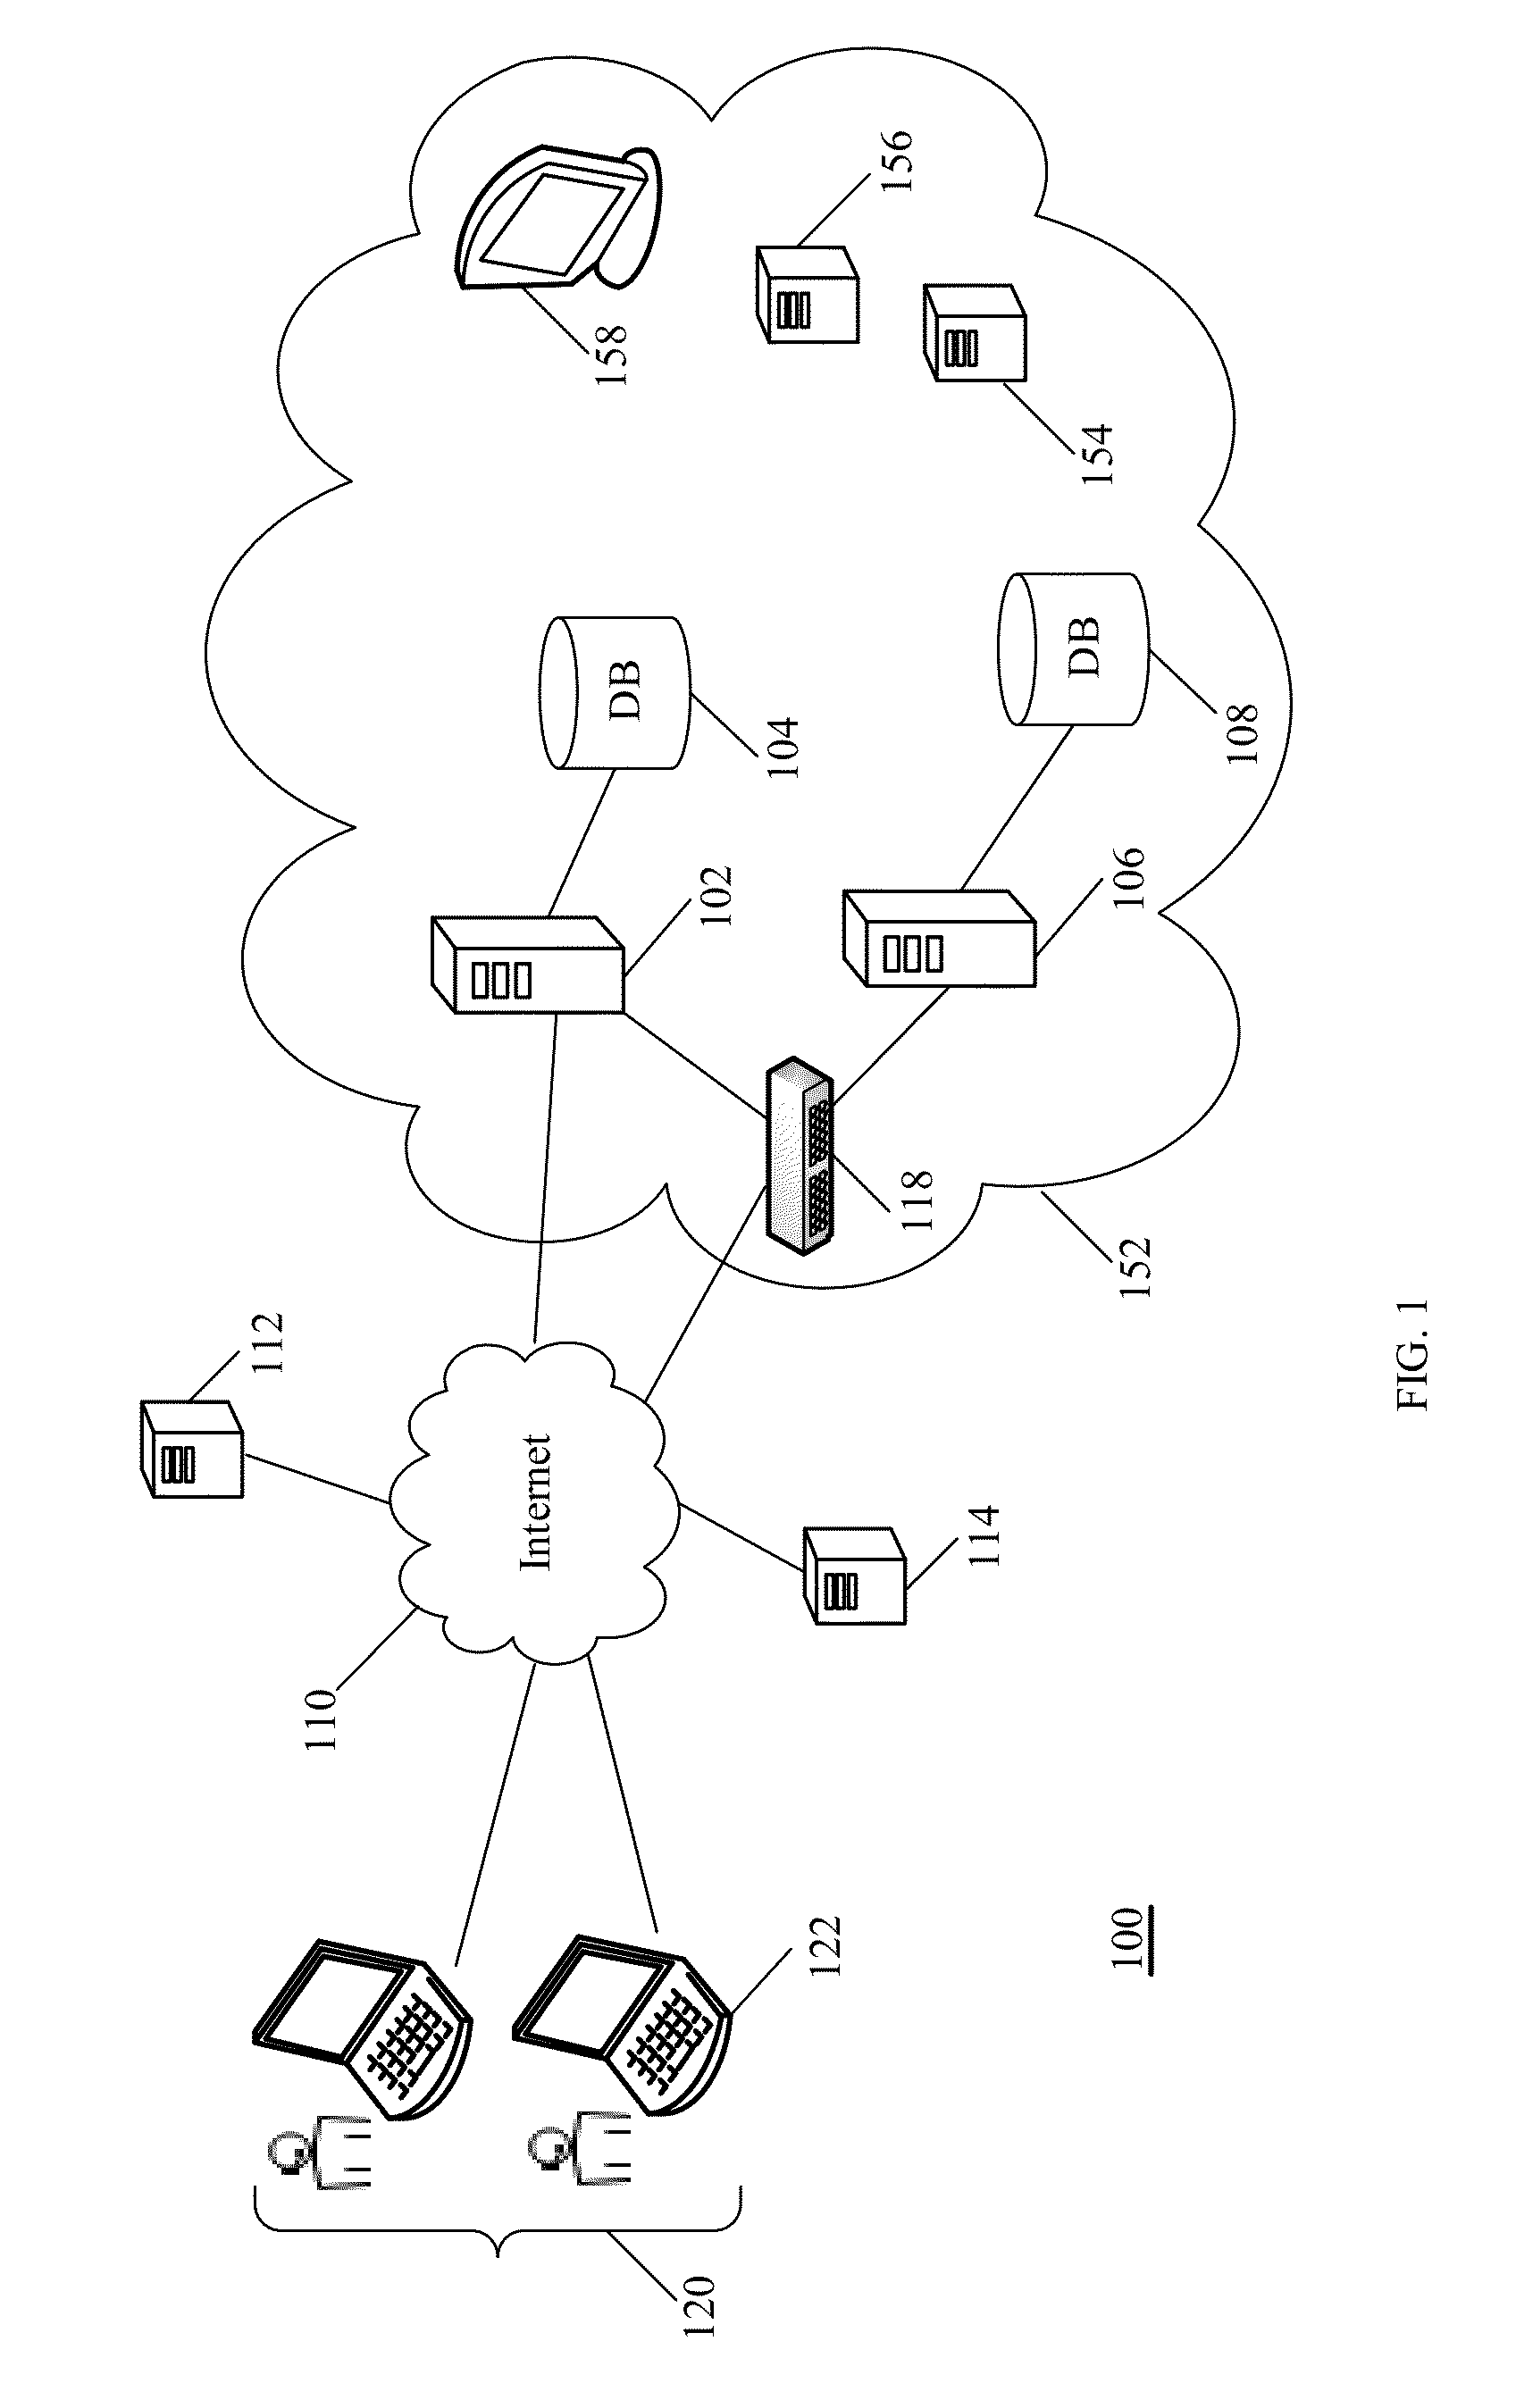 System, method and apparatus for scene recognition